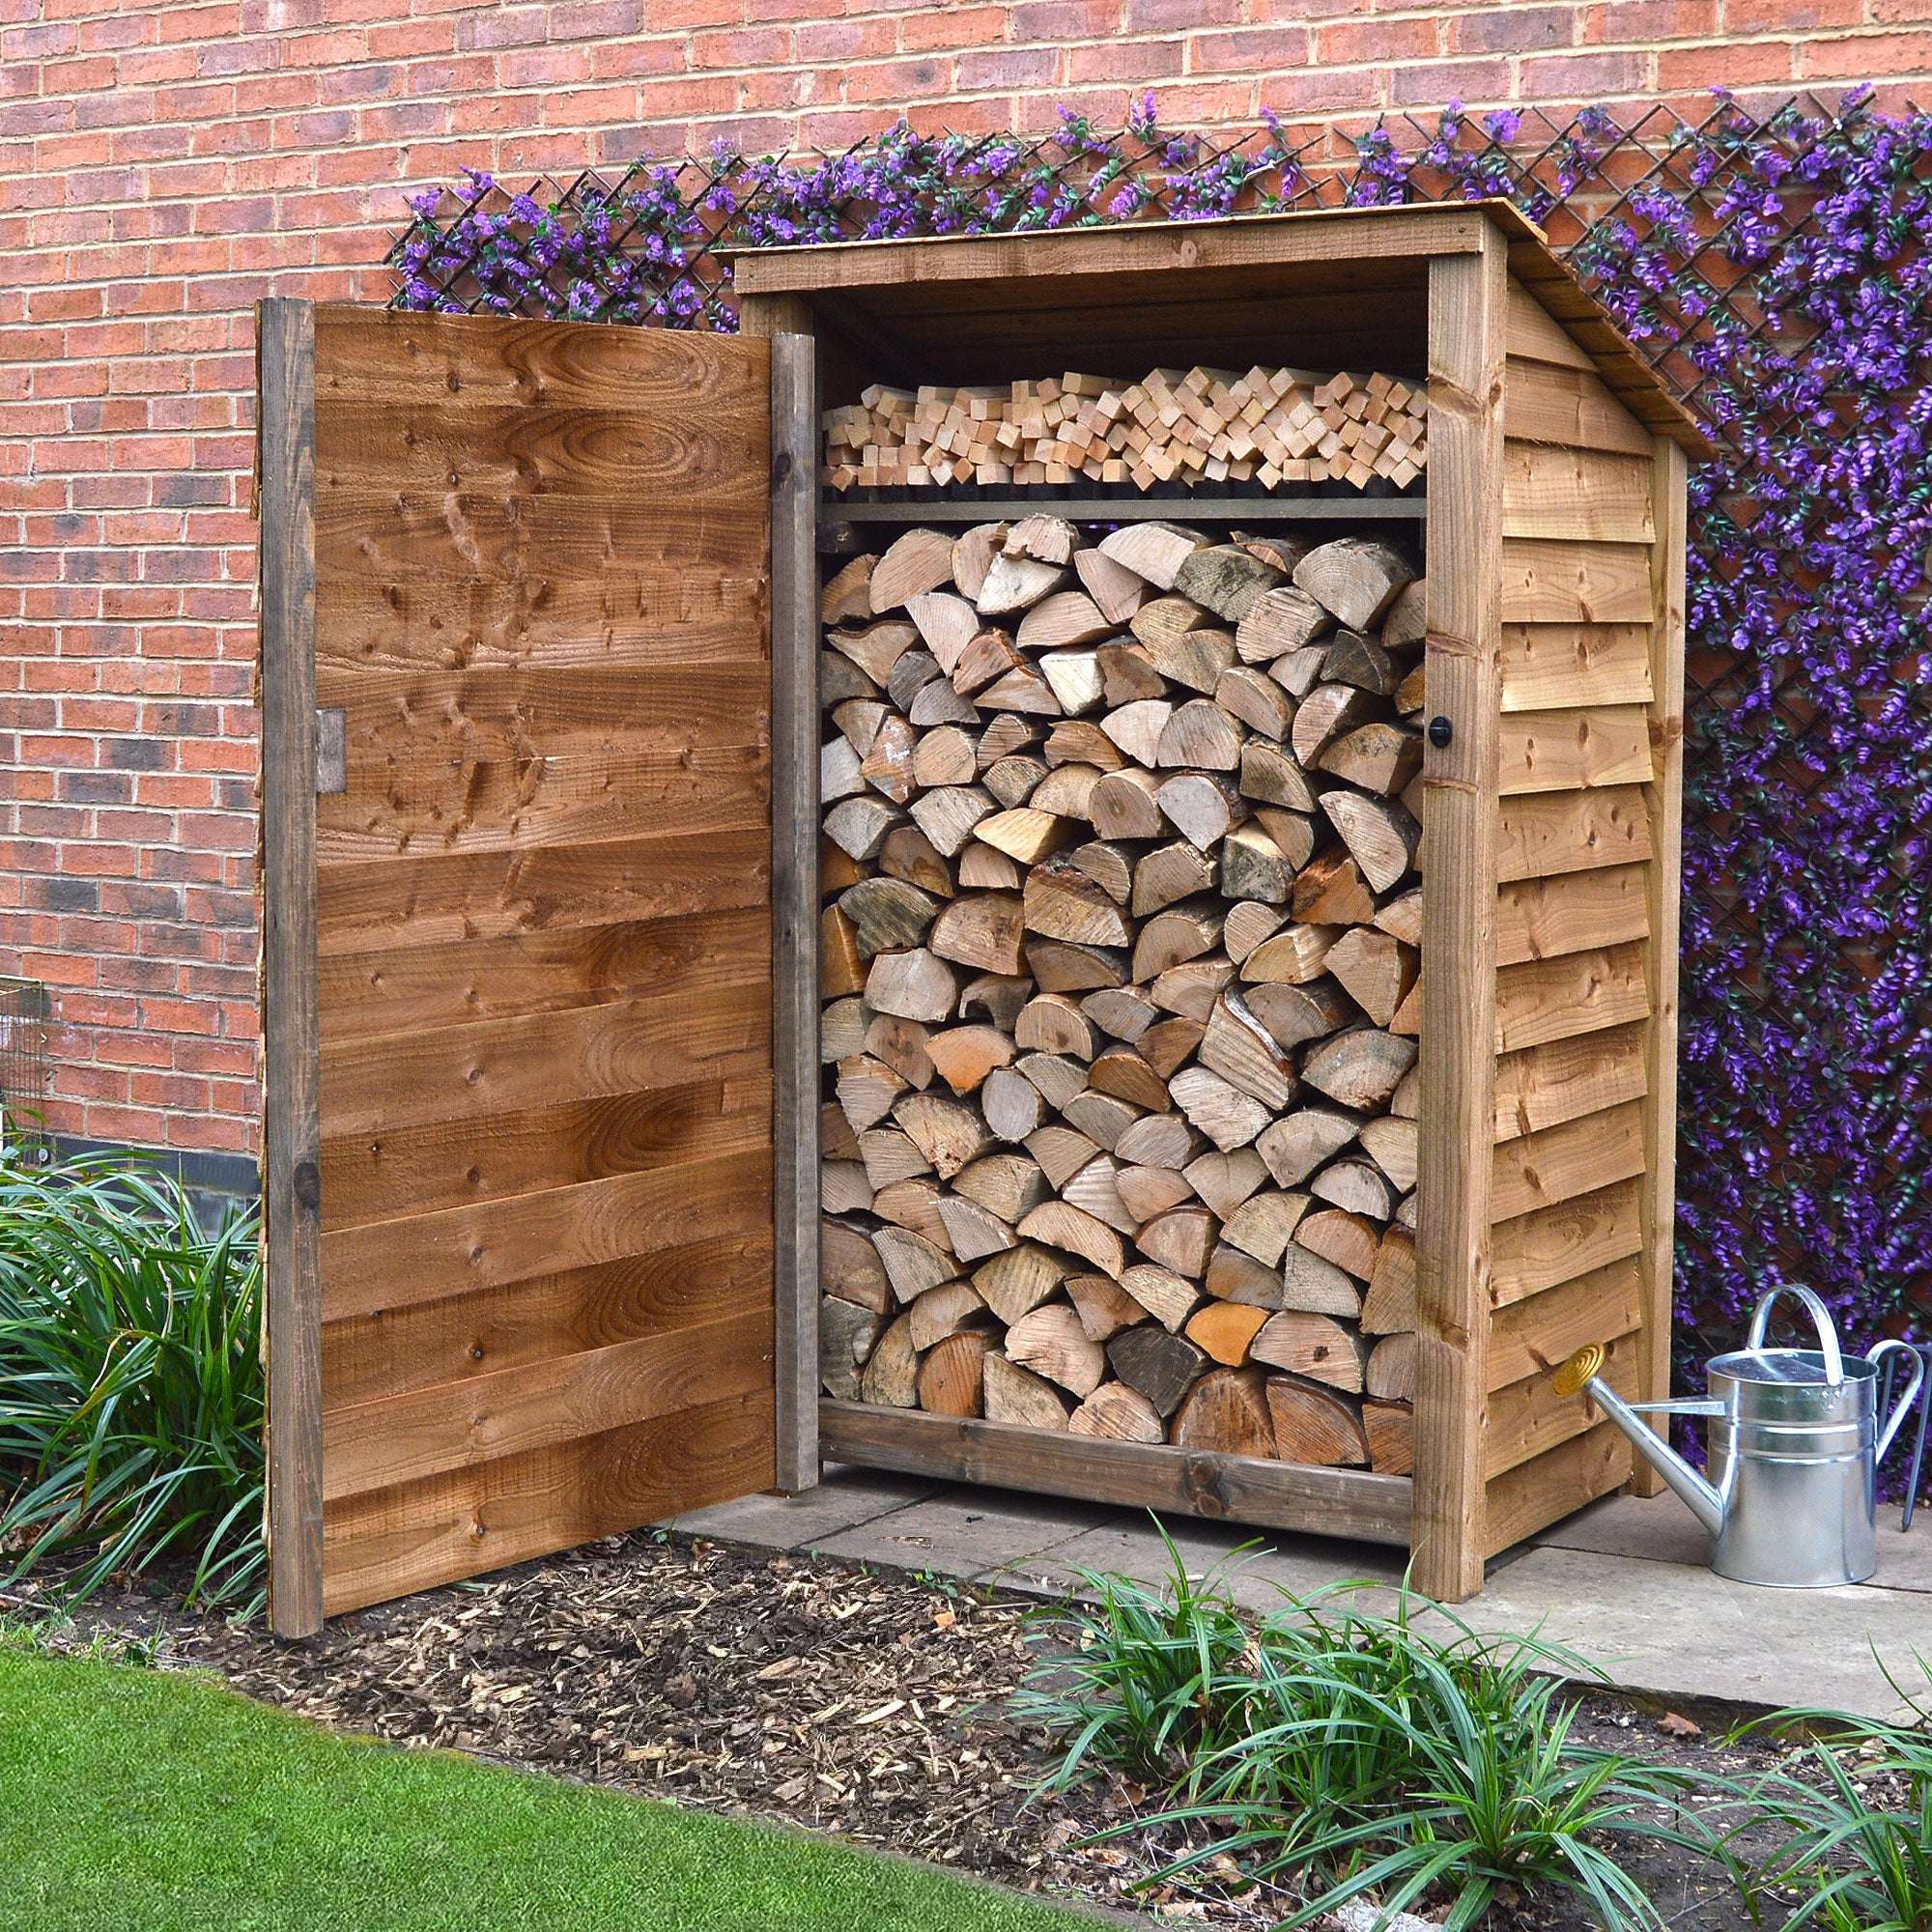 Rutland Country Greetham Log Store With Kindling Shelf and Door - 6ft:Rutland County,Exceptional Garden